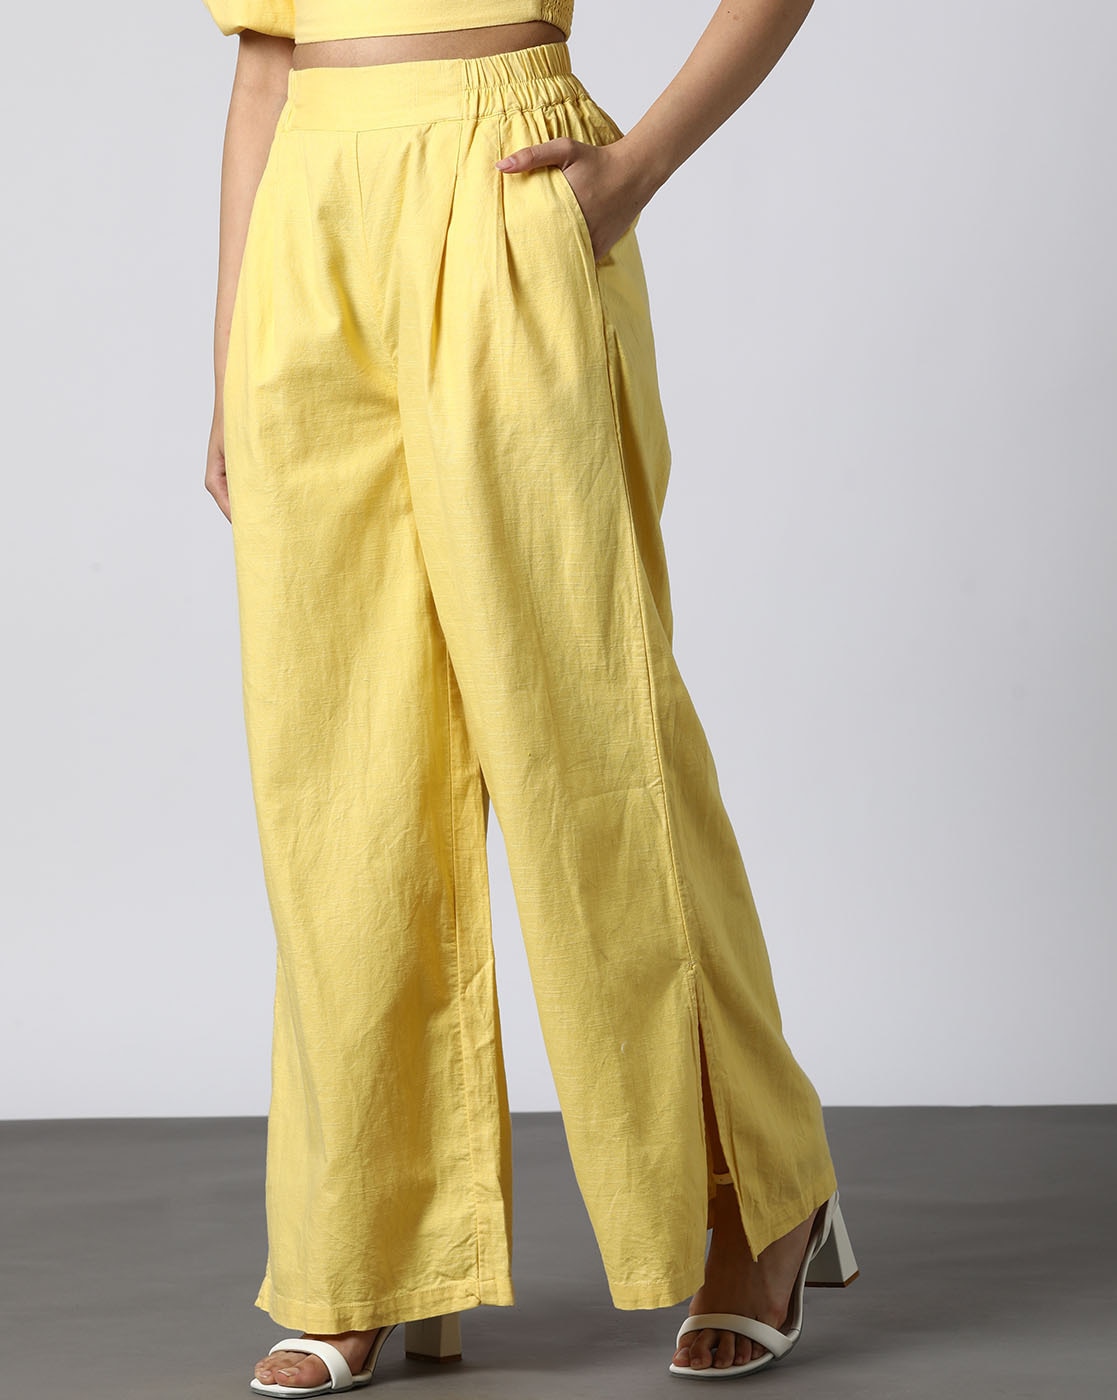 Yellow Climbing and Trekking Trousers Woman Saona. Buy online Jeans.